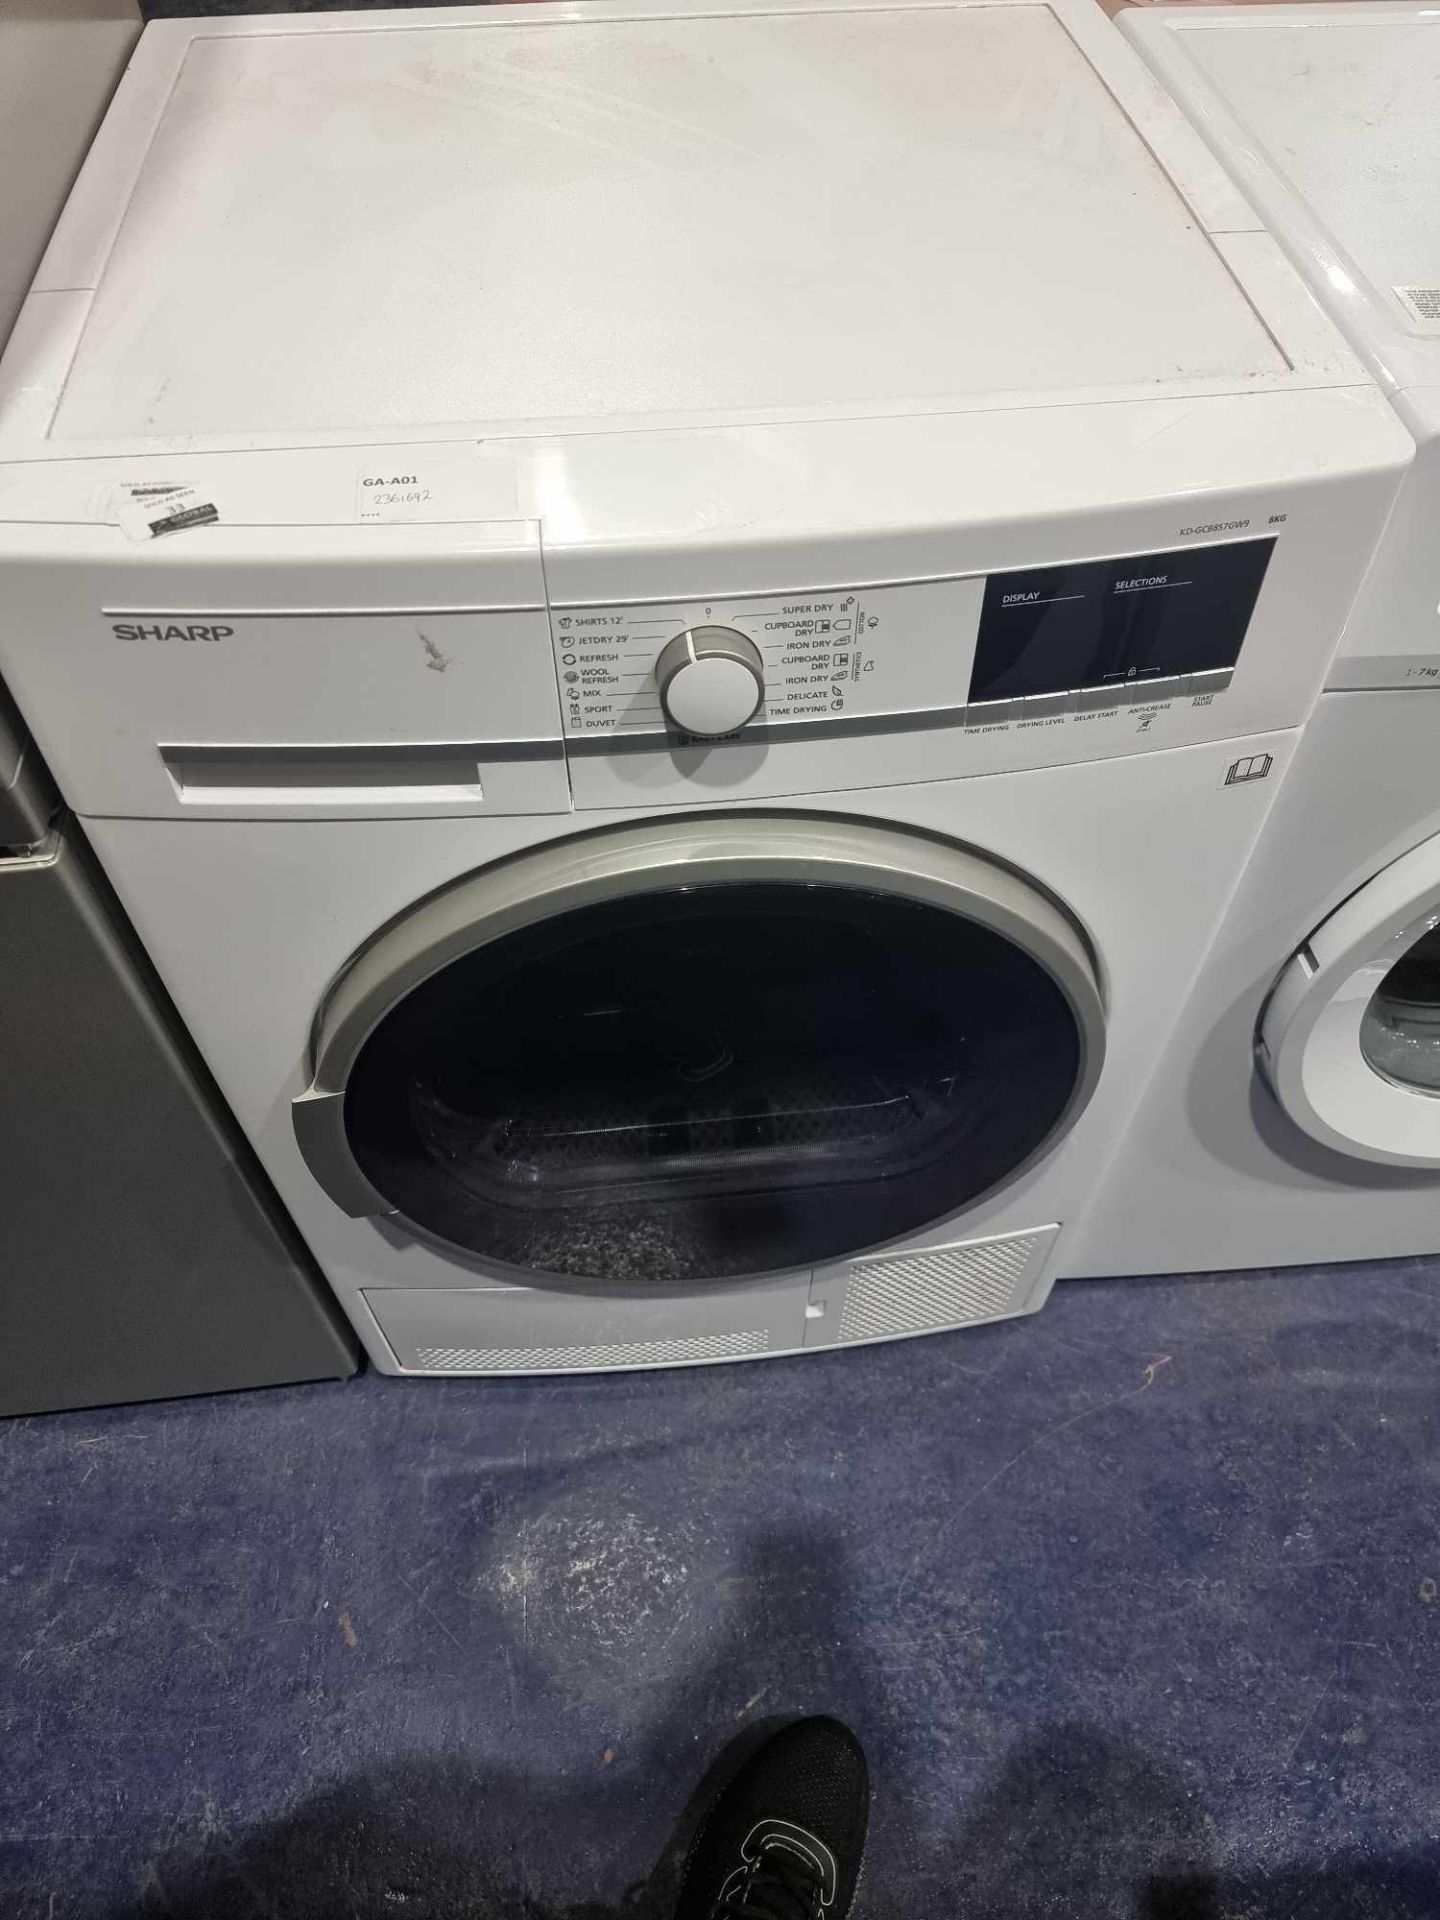 (Sp) RRP £300 Lot To Contain 1 Sharp Kd-Gcb8S7Gw9-En 8Kg Condenser Tumble Dryer - Image 4 of 4